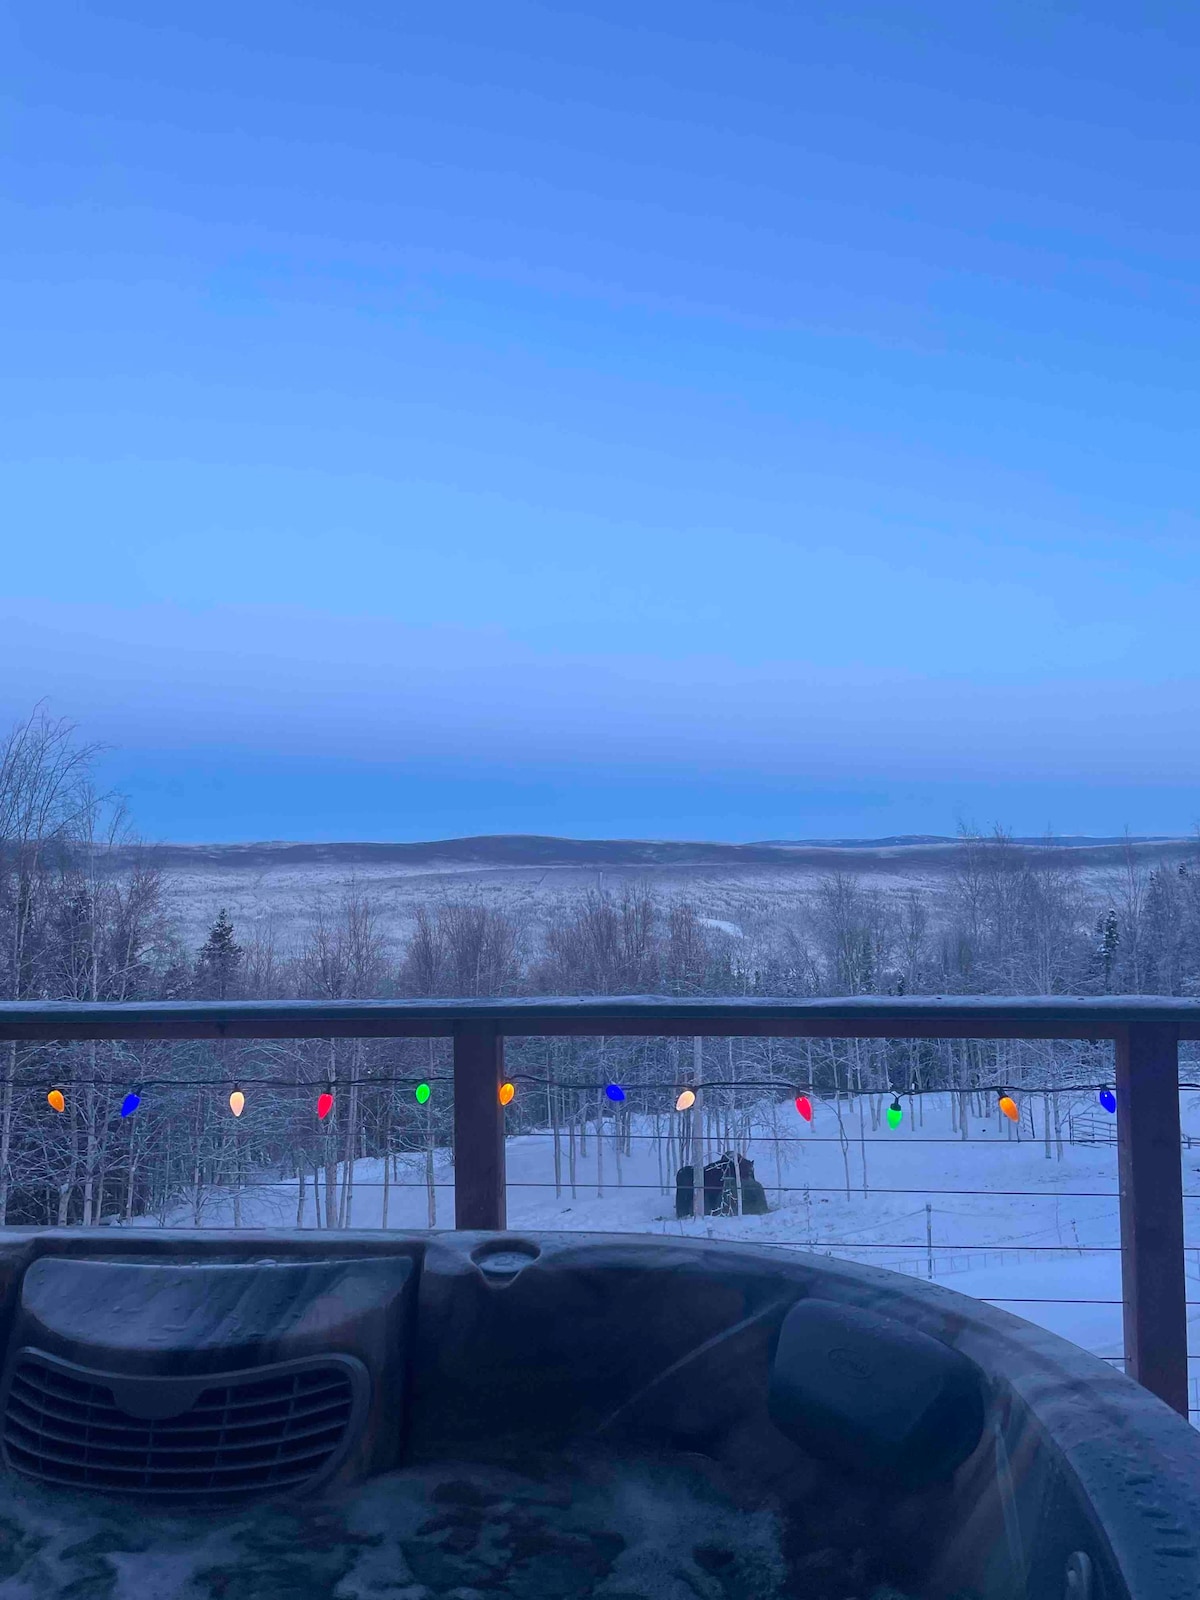 Chickadee Lodge- with view of the Northern Lights!